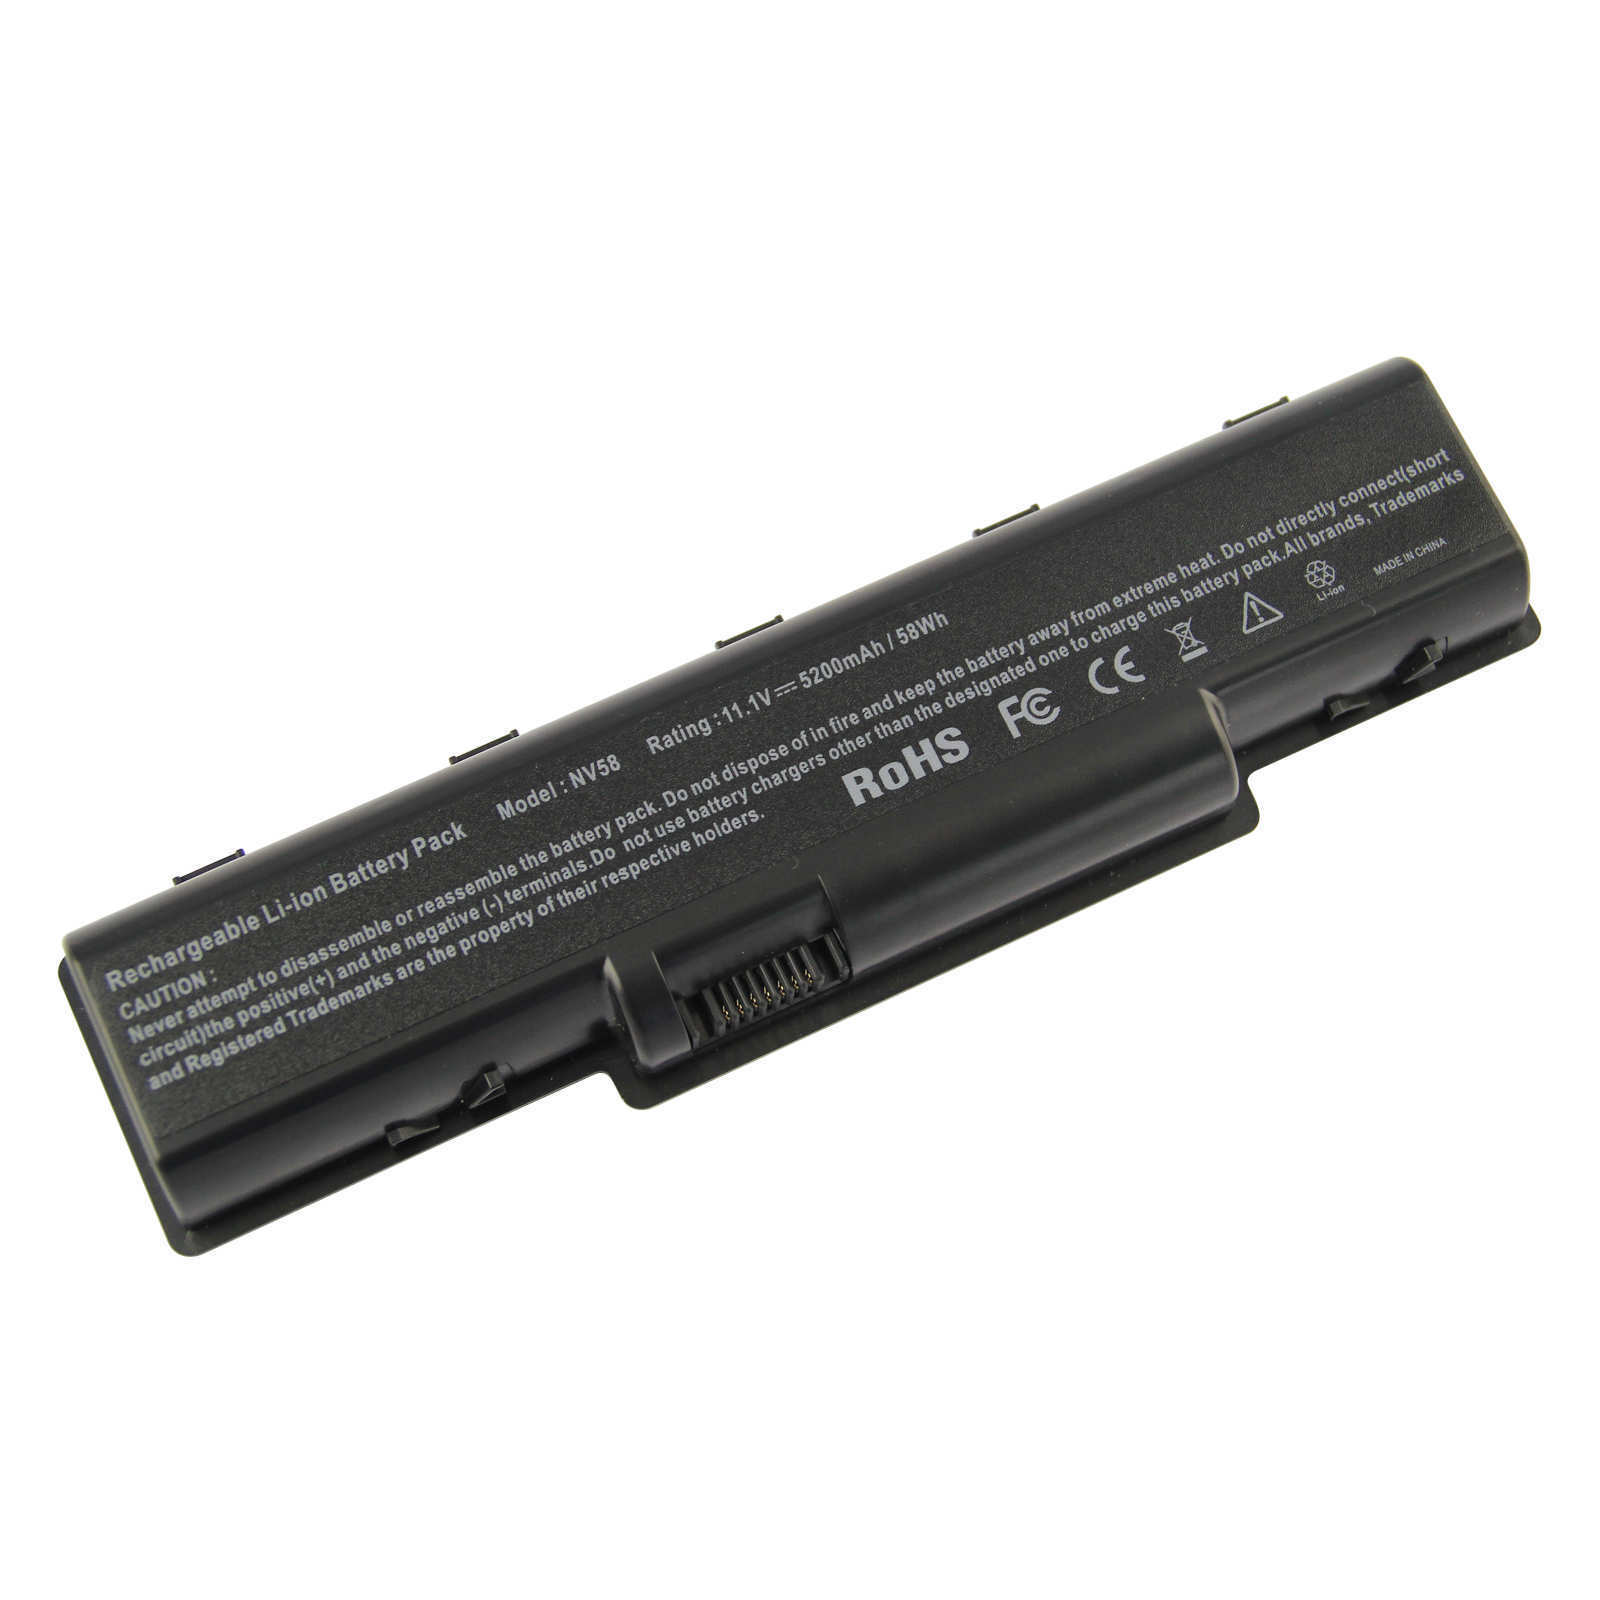 Laptop Battery for Gateway NV52 58 Acer AS09A31 AS09A61 AS09A51 AS09A41 AS09A71